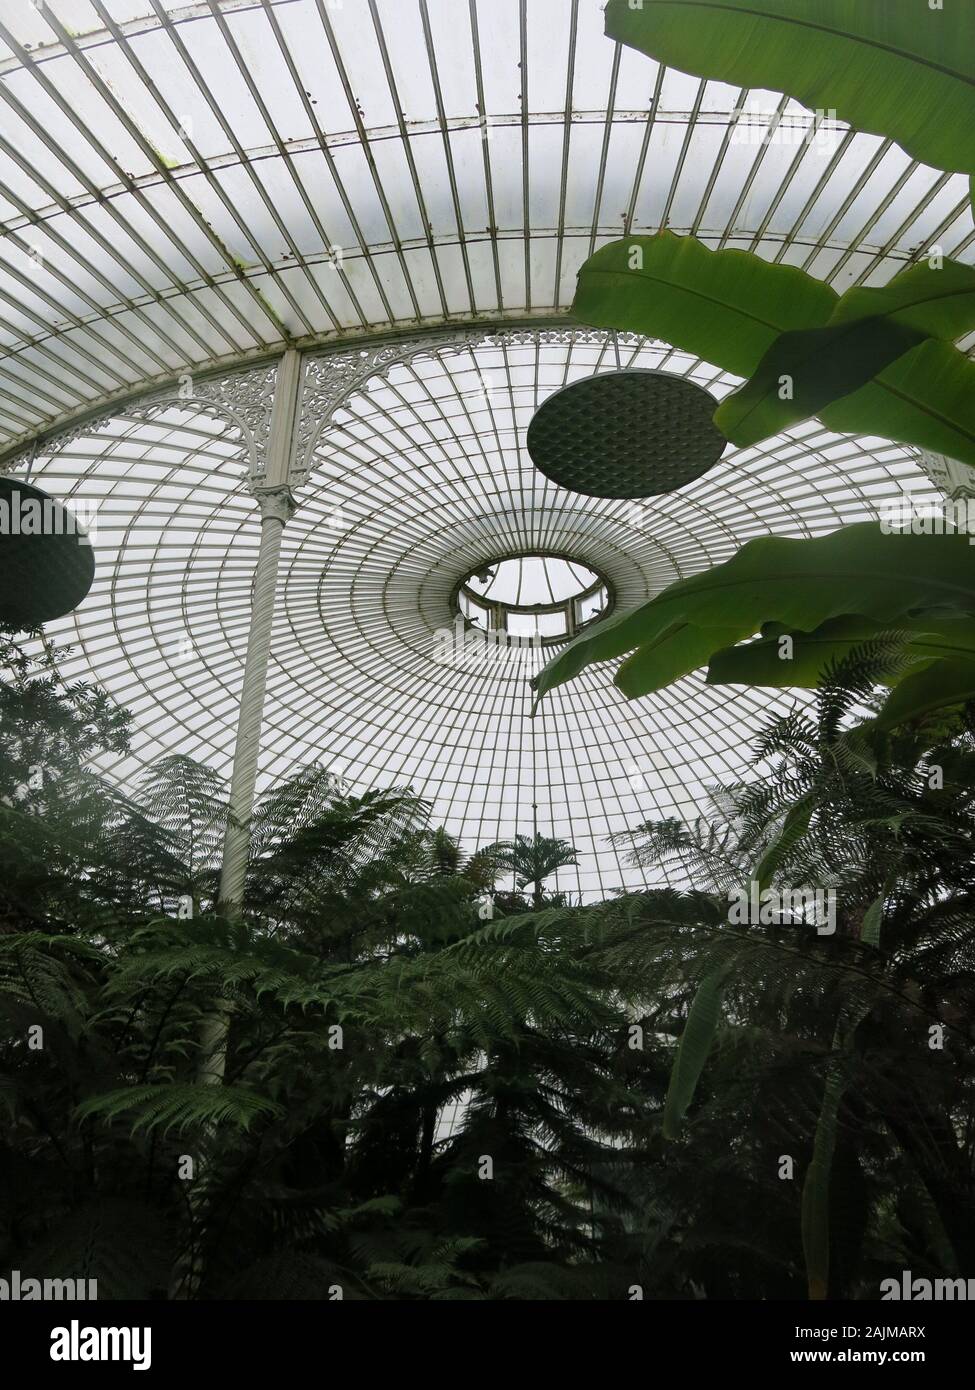 Striking lacy pattern of fronds of tree ferns silhouetted against the wrought iron and glass dome of the Kibble Palace at Glasgow Botanic Gardens. Stock Photo